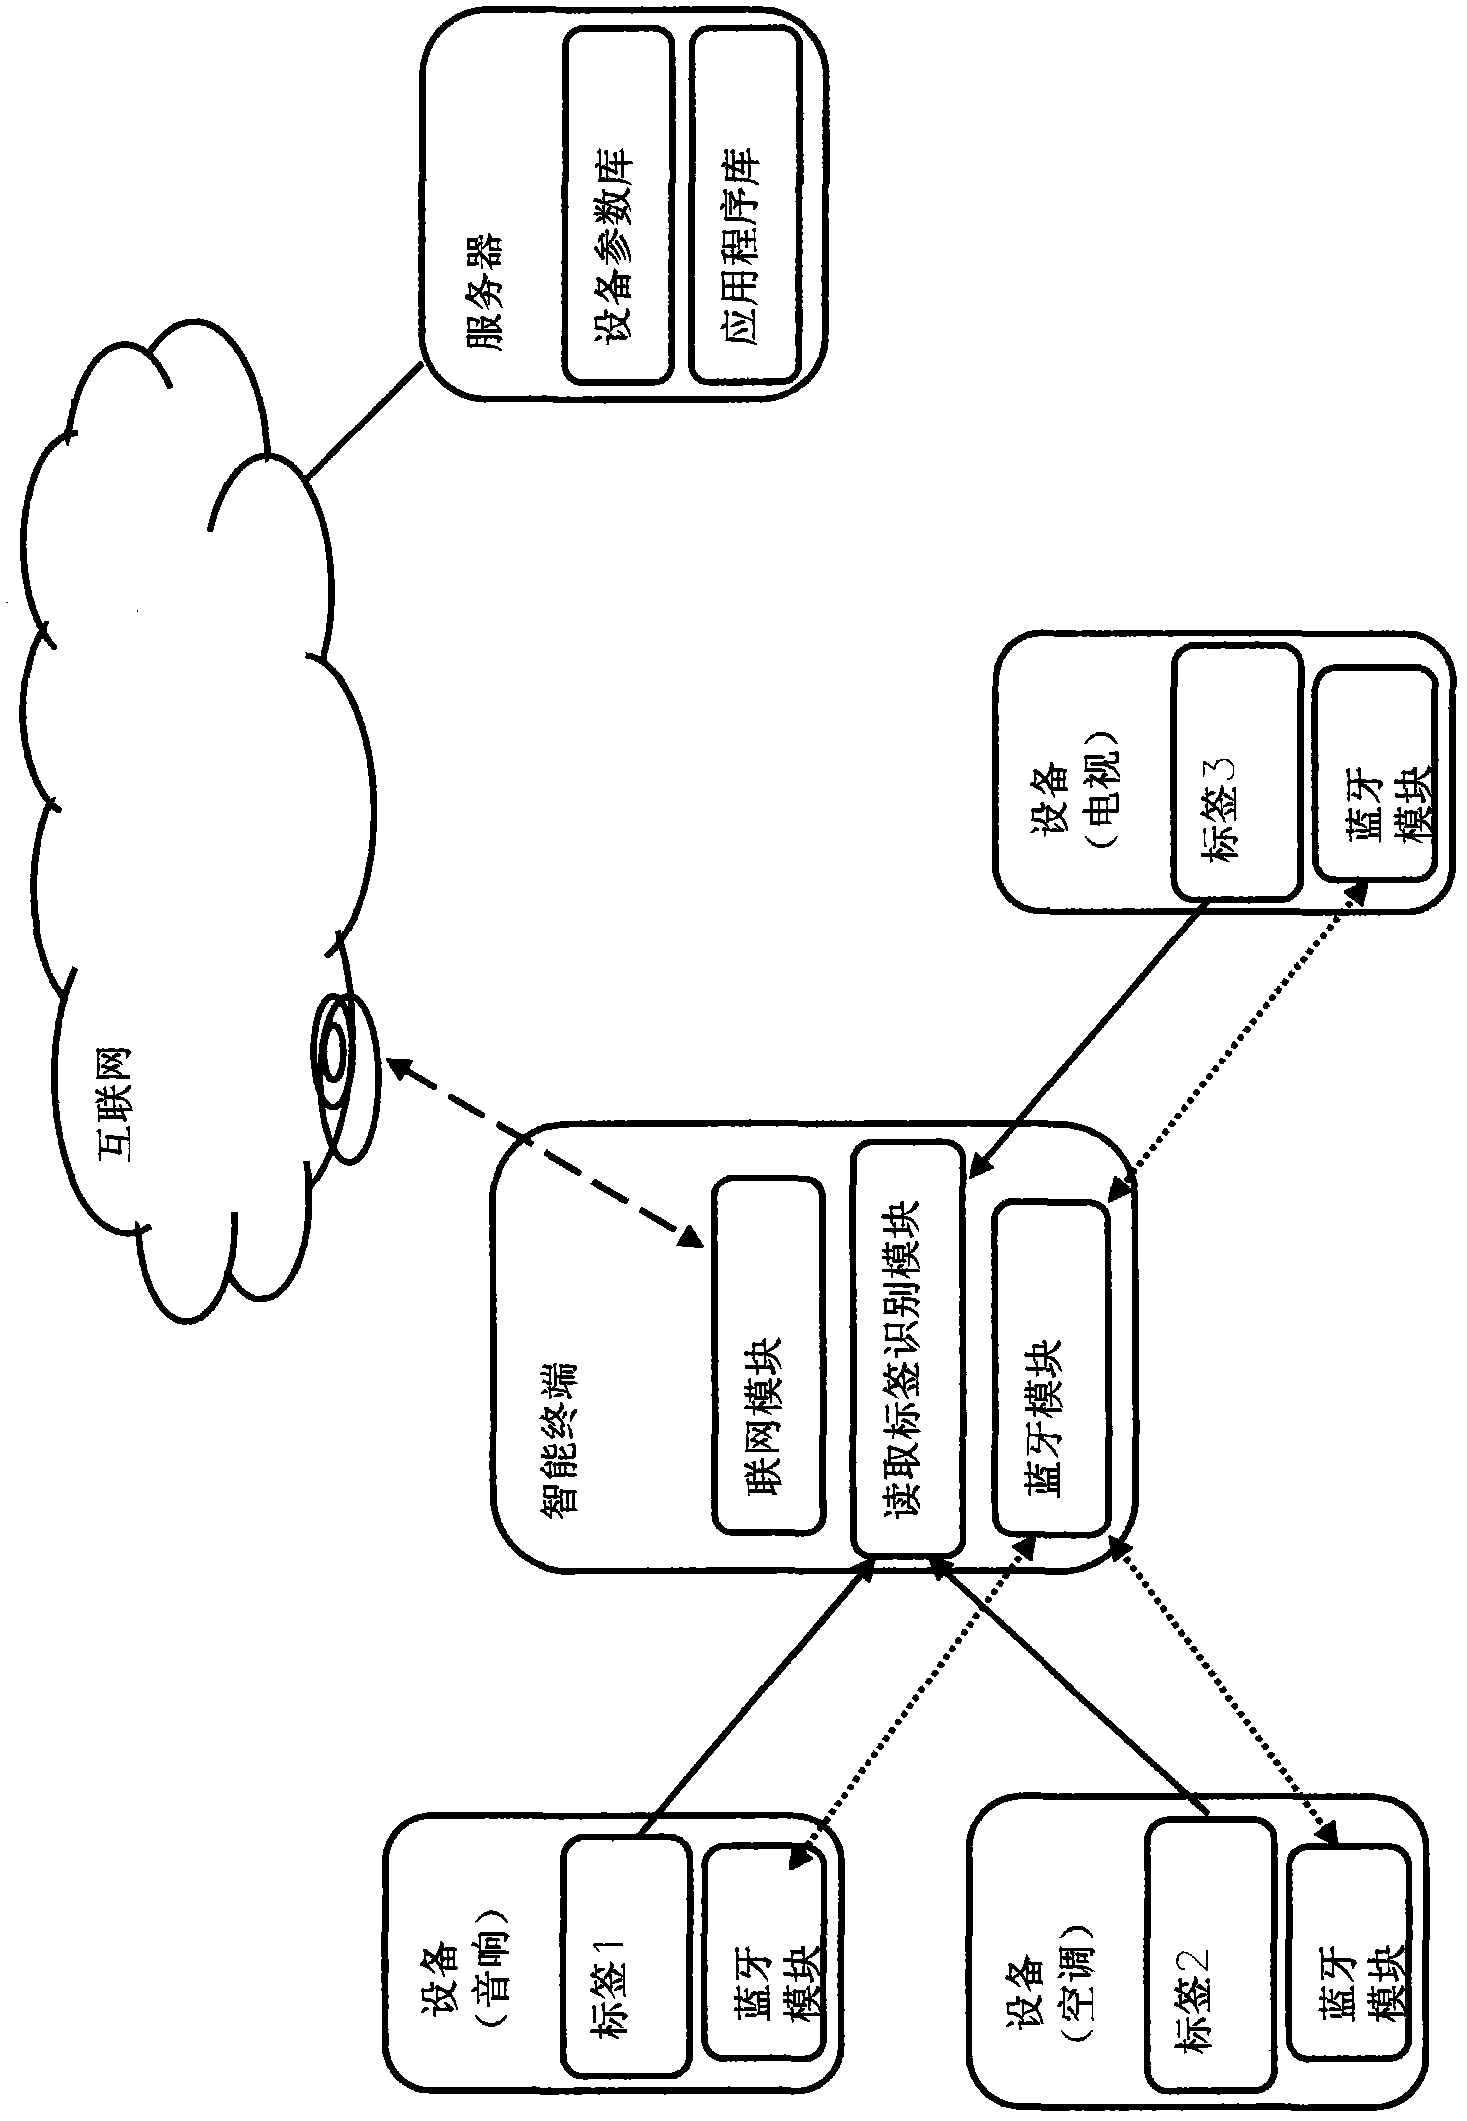 Method and system for connecting and controlling equipment automatically by intelligent terminal via identification tags